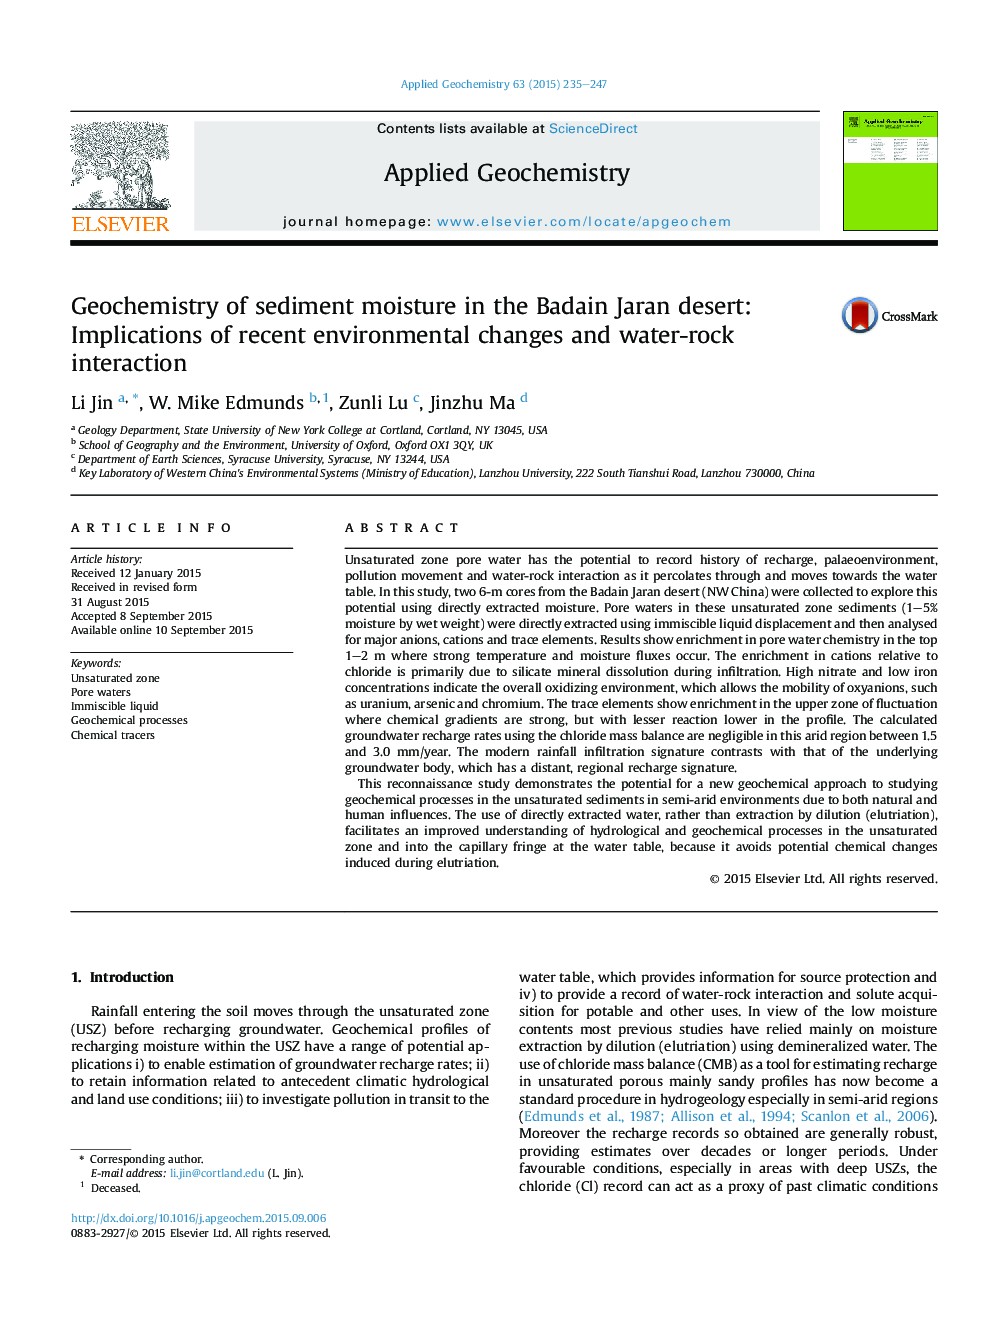 Geochemistry of sediment moisture in the Badain Jaran desert: Implications of recent environmental changes and water-rock interaction